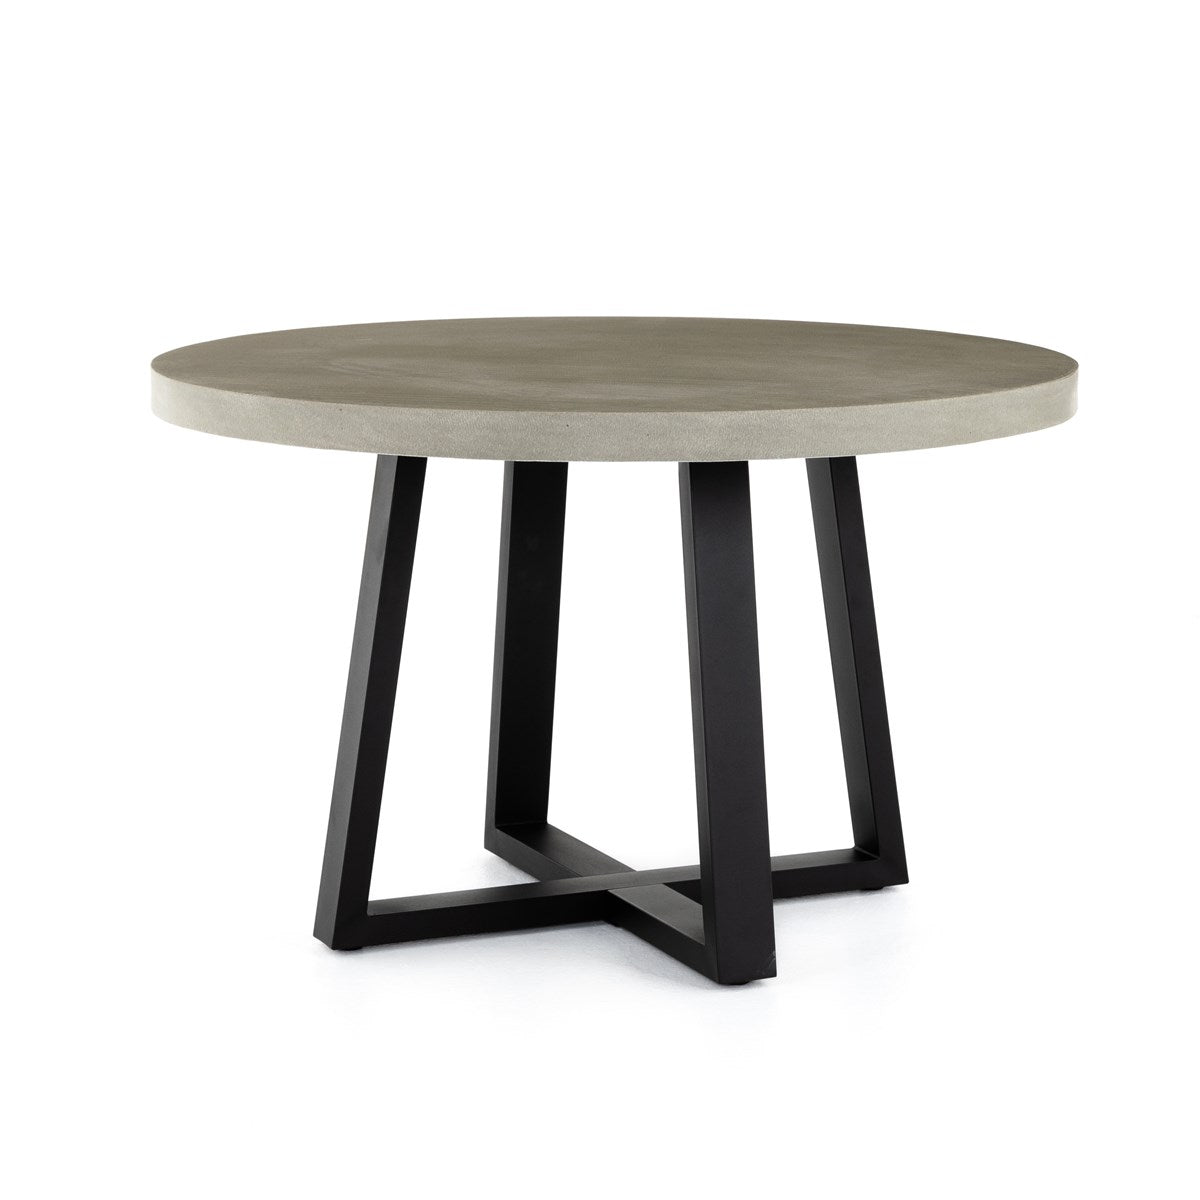 Cyrus Outdoor Round Dining Table Dining Table Four Hands     Four Hands, Burke Decor, Mid Century Modern Furniture, Old Bones Furniture Company, Old Bones Co, Modern Mid Century, Designer Furniture, https://www.oldbonesco.com/